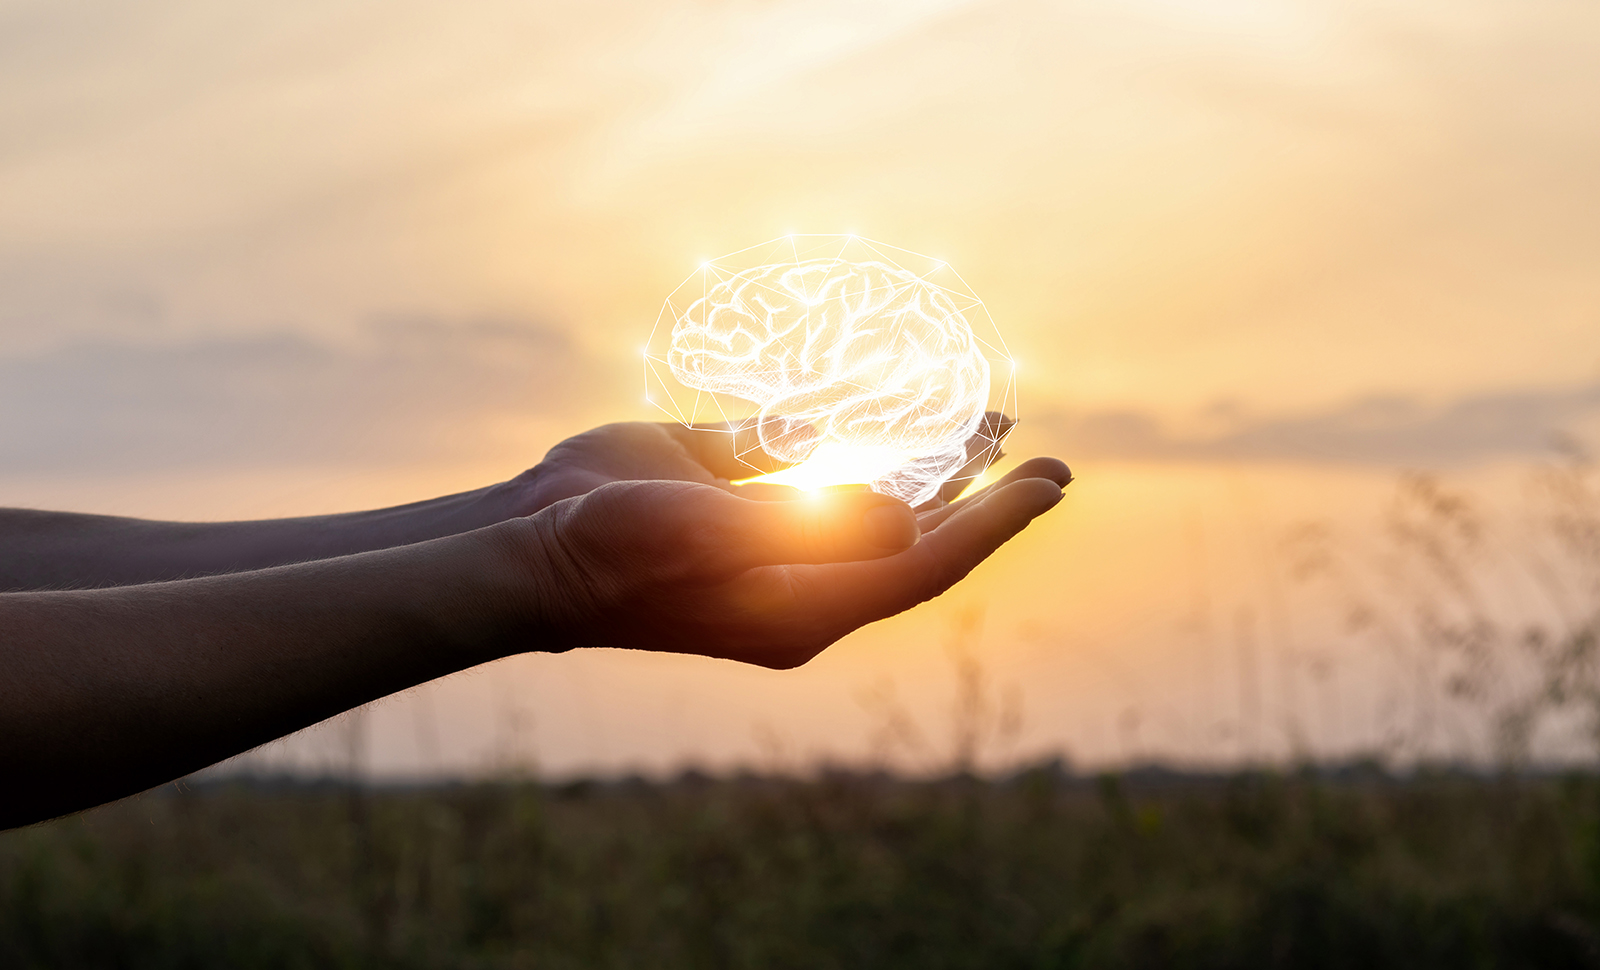 Hands holding a glowing image of a brain, denoting positive mental health, with a sunrise in the background